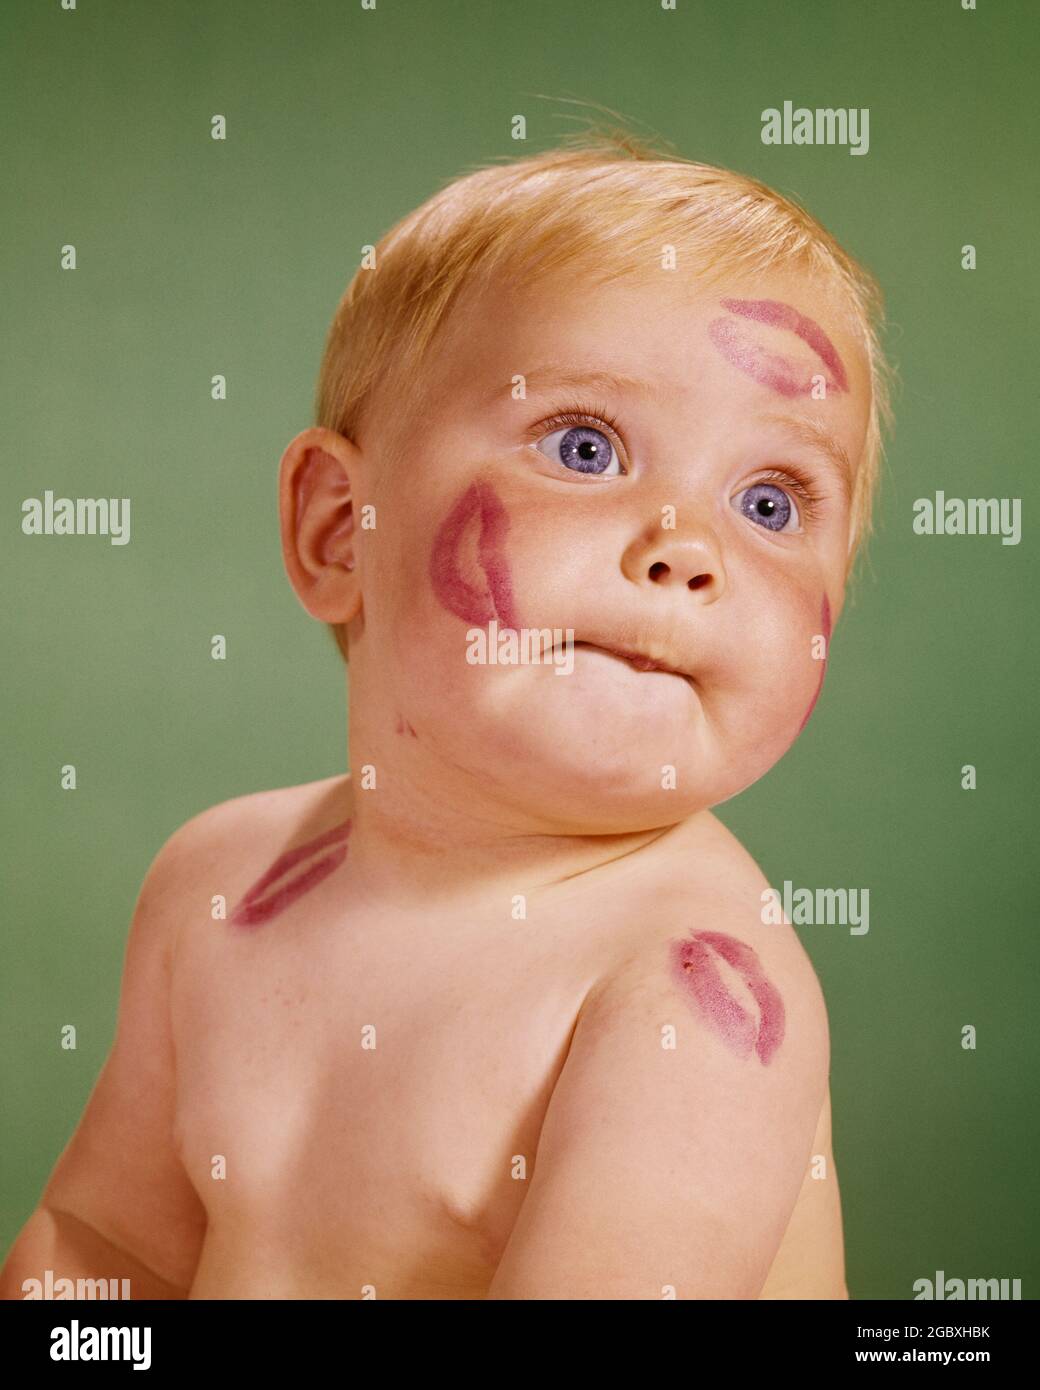 1960s PORTRAIT OF BLONDE BABY WITH RED LIPSTICK KISS MARKS ON HER FACE AND SHOULDERS - kb5303 HAR001 HARS LIFESTYLE FEMALES WINNING STUDIO SHOT HEALTHINESS COPY SPACE FRIENDSHIP INSPIRATION CARING EXPRESSIONS HUMOROUS HEAD AND SHOULDERS AND LIPSTICK COMICAL CONCEPTUAL COMEDY PERSONAL ATTACHMENT PLEASANT AFFECTION AGREEABLE CHARMING EMOTION GROWTH JUVENILES LOOKING UP LOVABLE PECK PLEASING SMOOCH ADORABLE APPEALING BABY GIRL BLUE EYES CAUCASIAN ETHNICITY HAR001 MARKS OLD FASHIONED Stock Photo